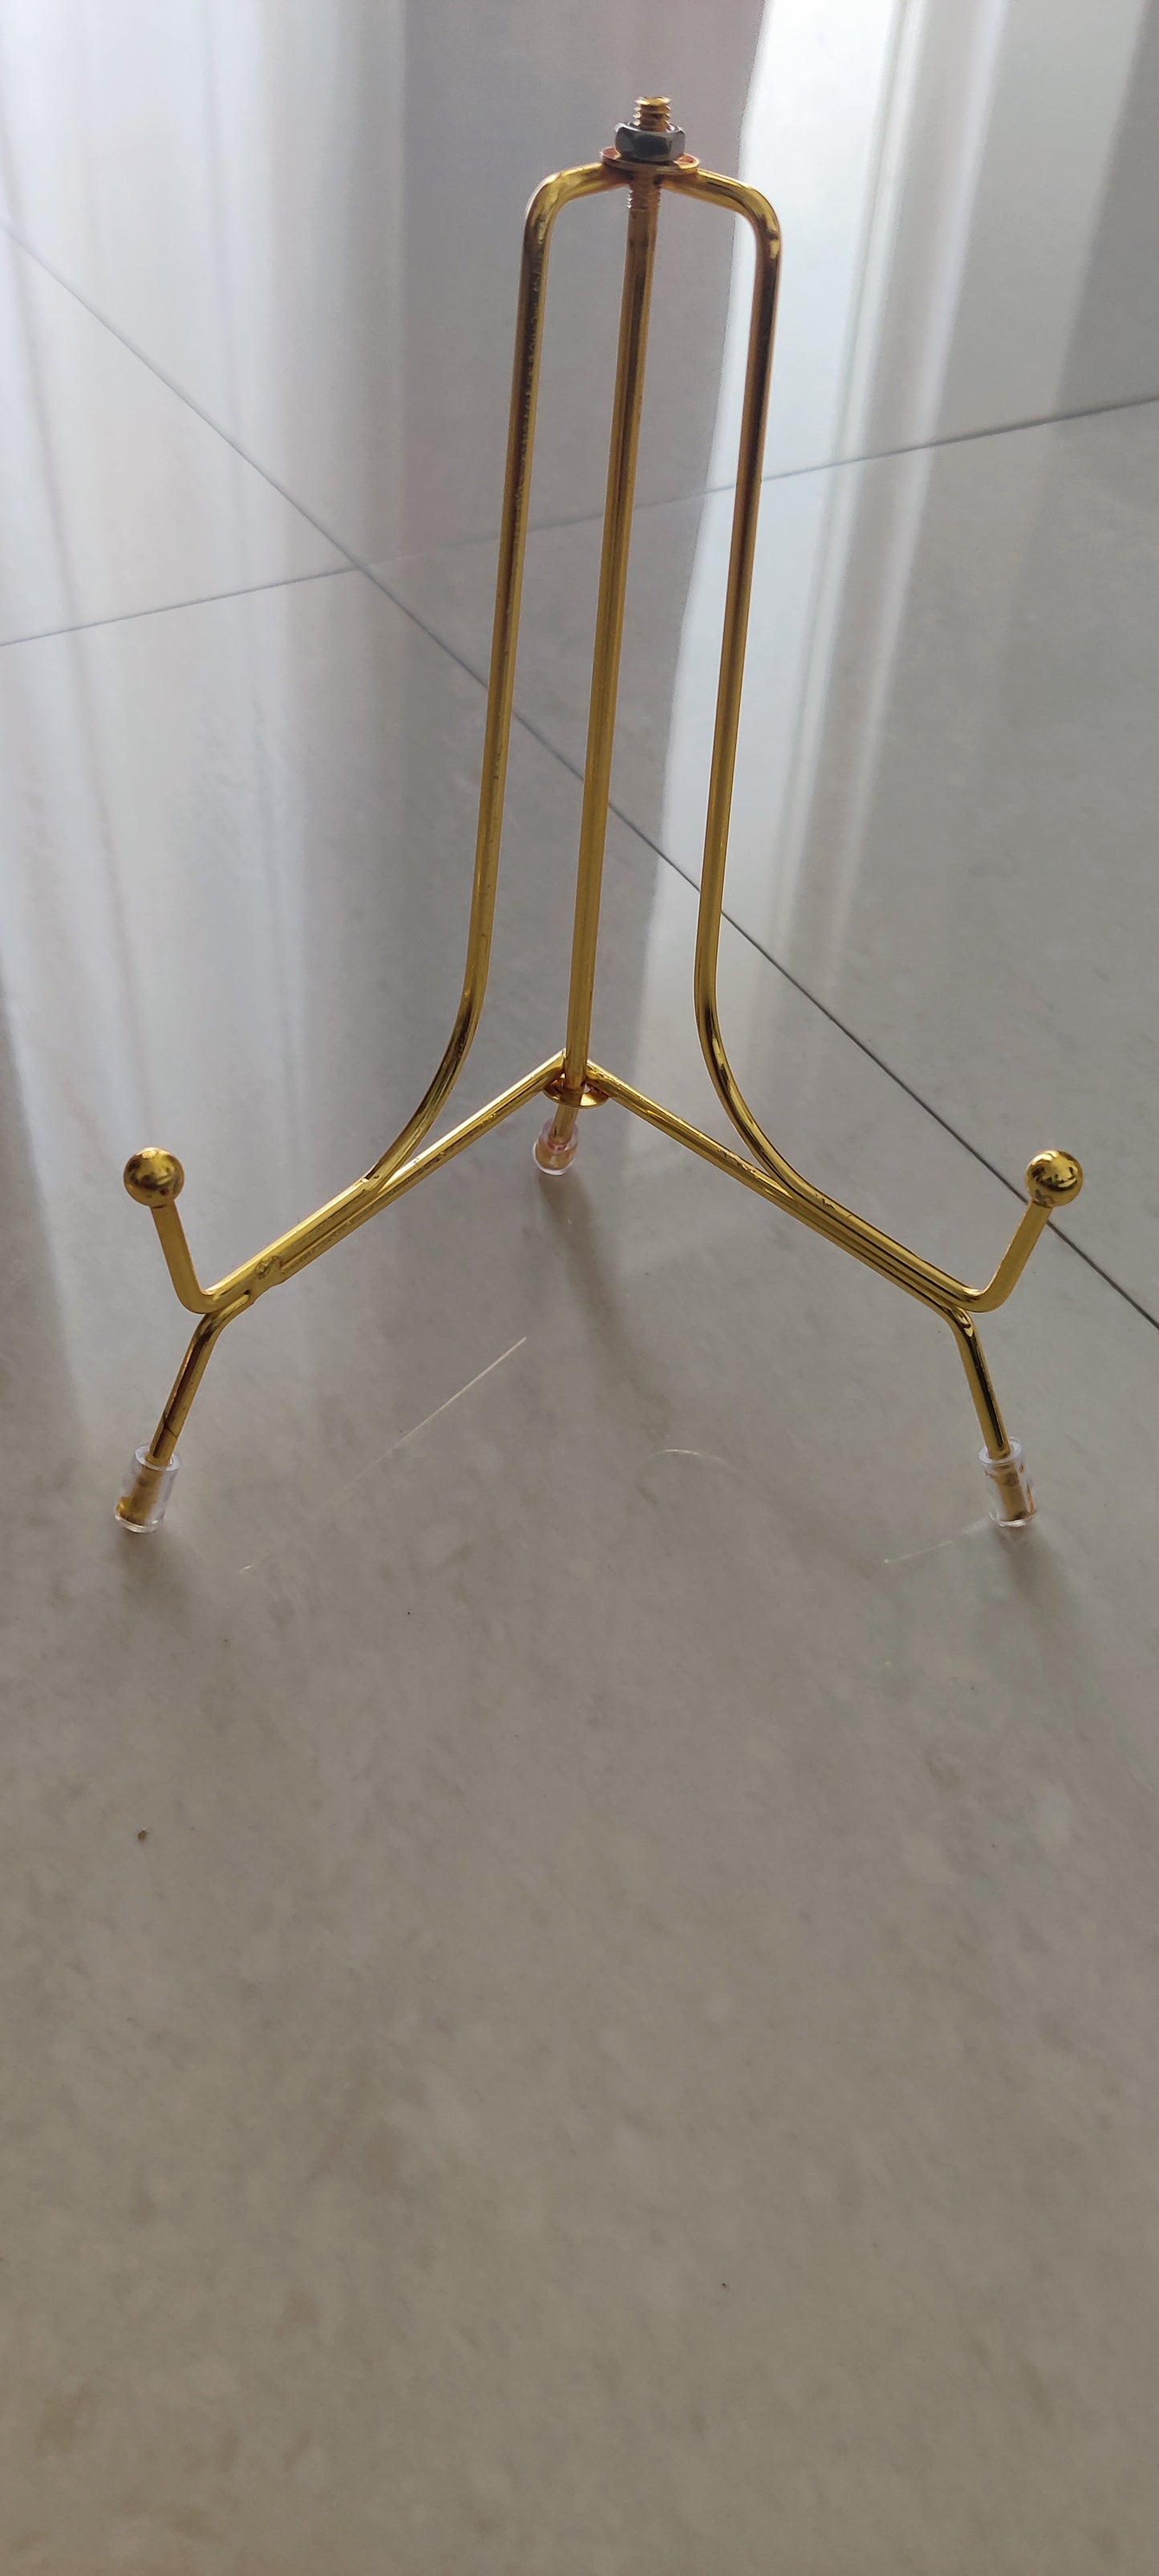 6 Inch Foldable Metal Stand with Cap